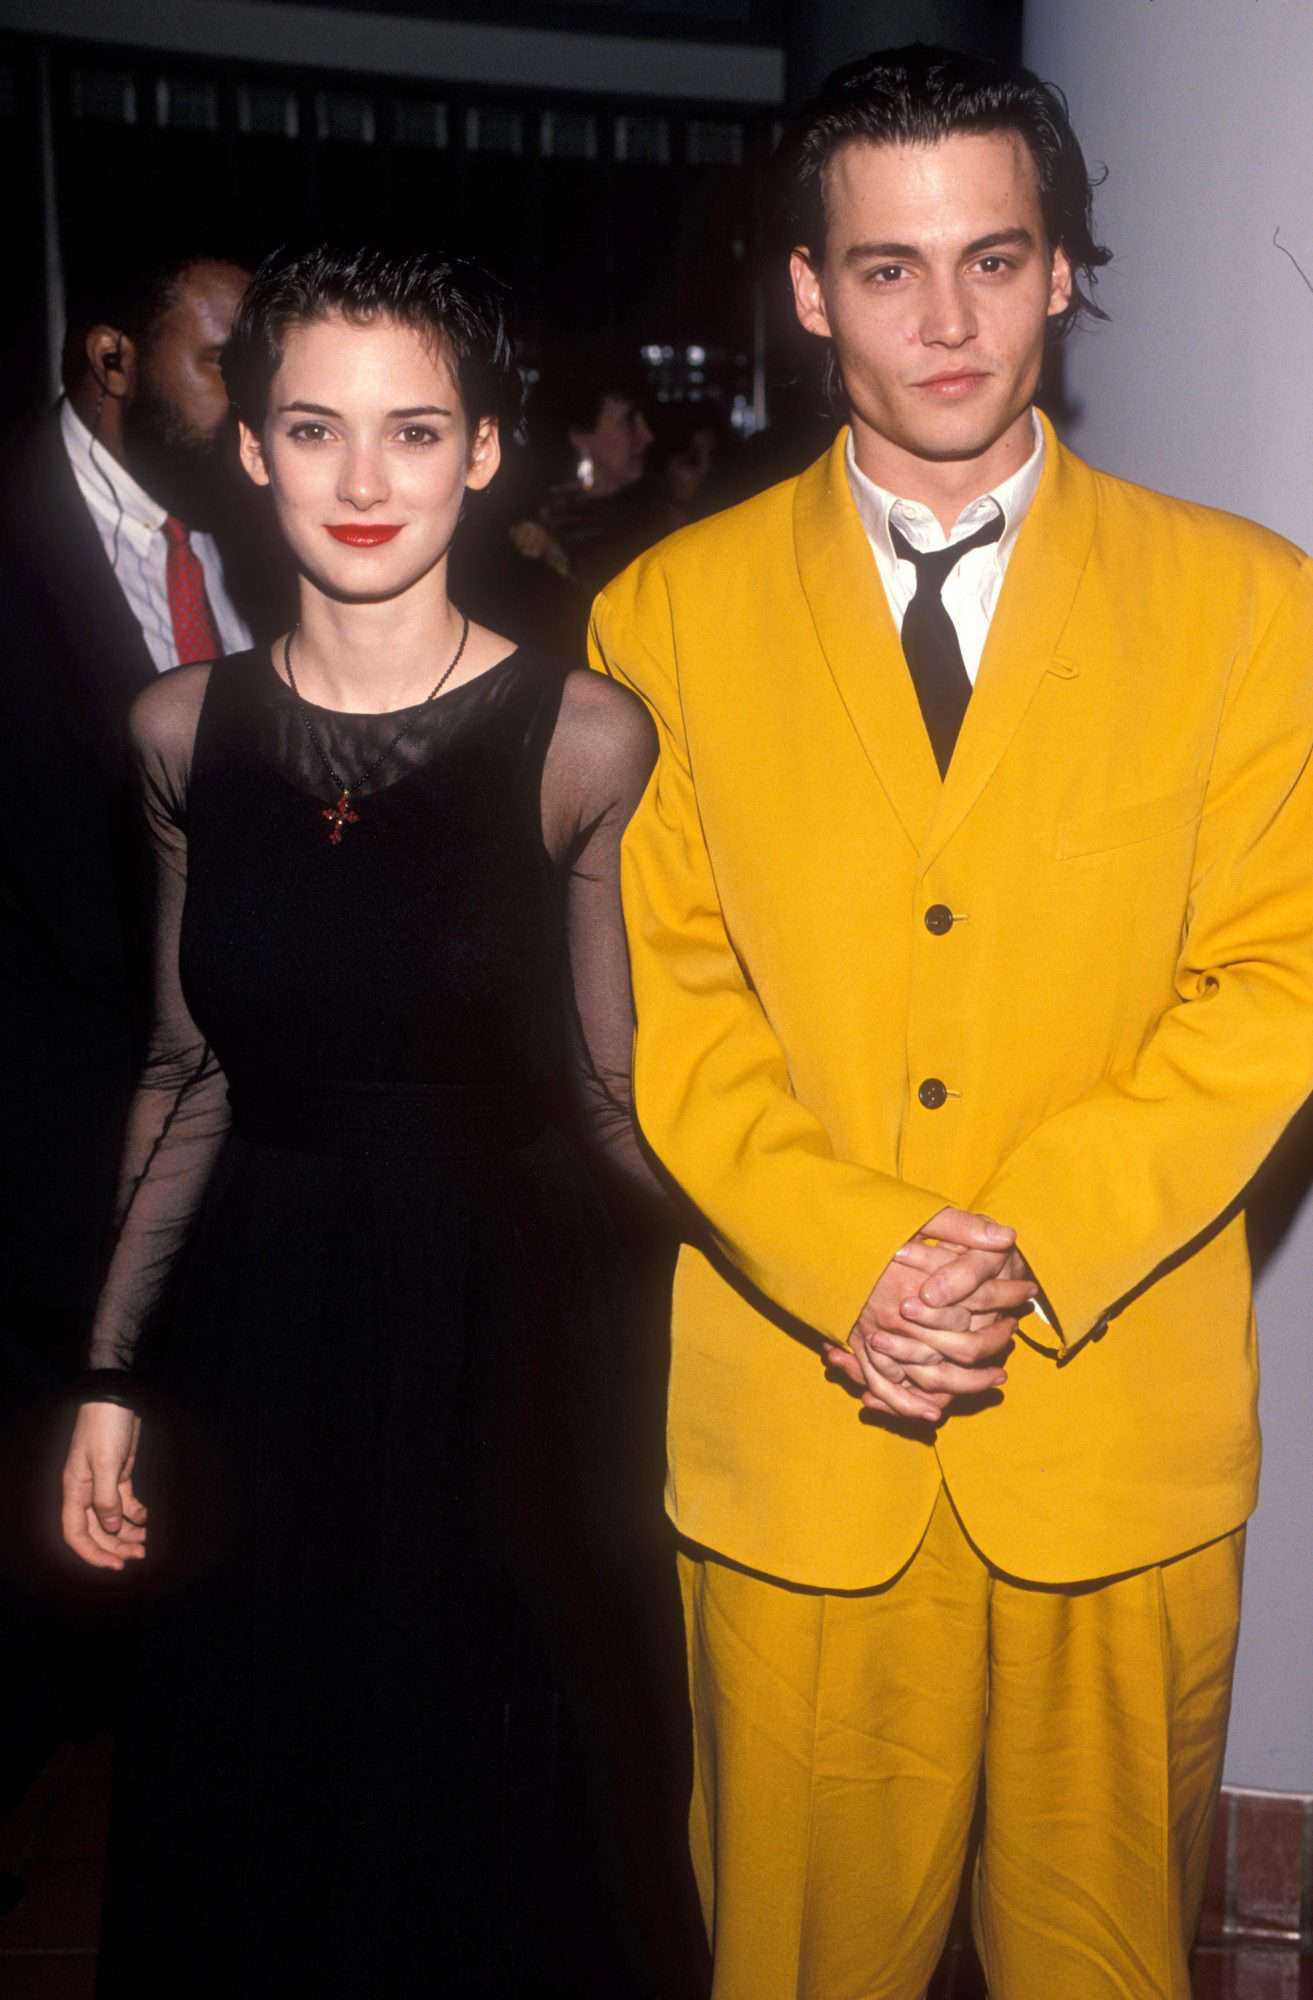 Winona Ryder and Johnny Depp (Source: People)